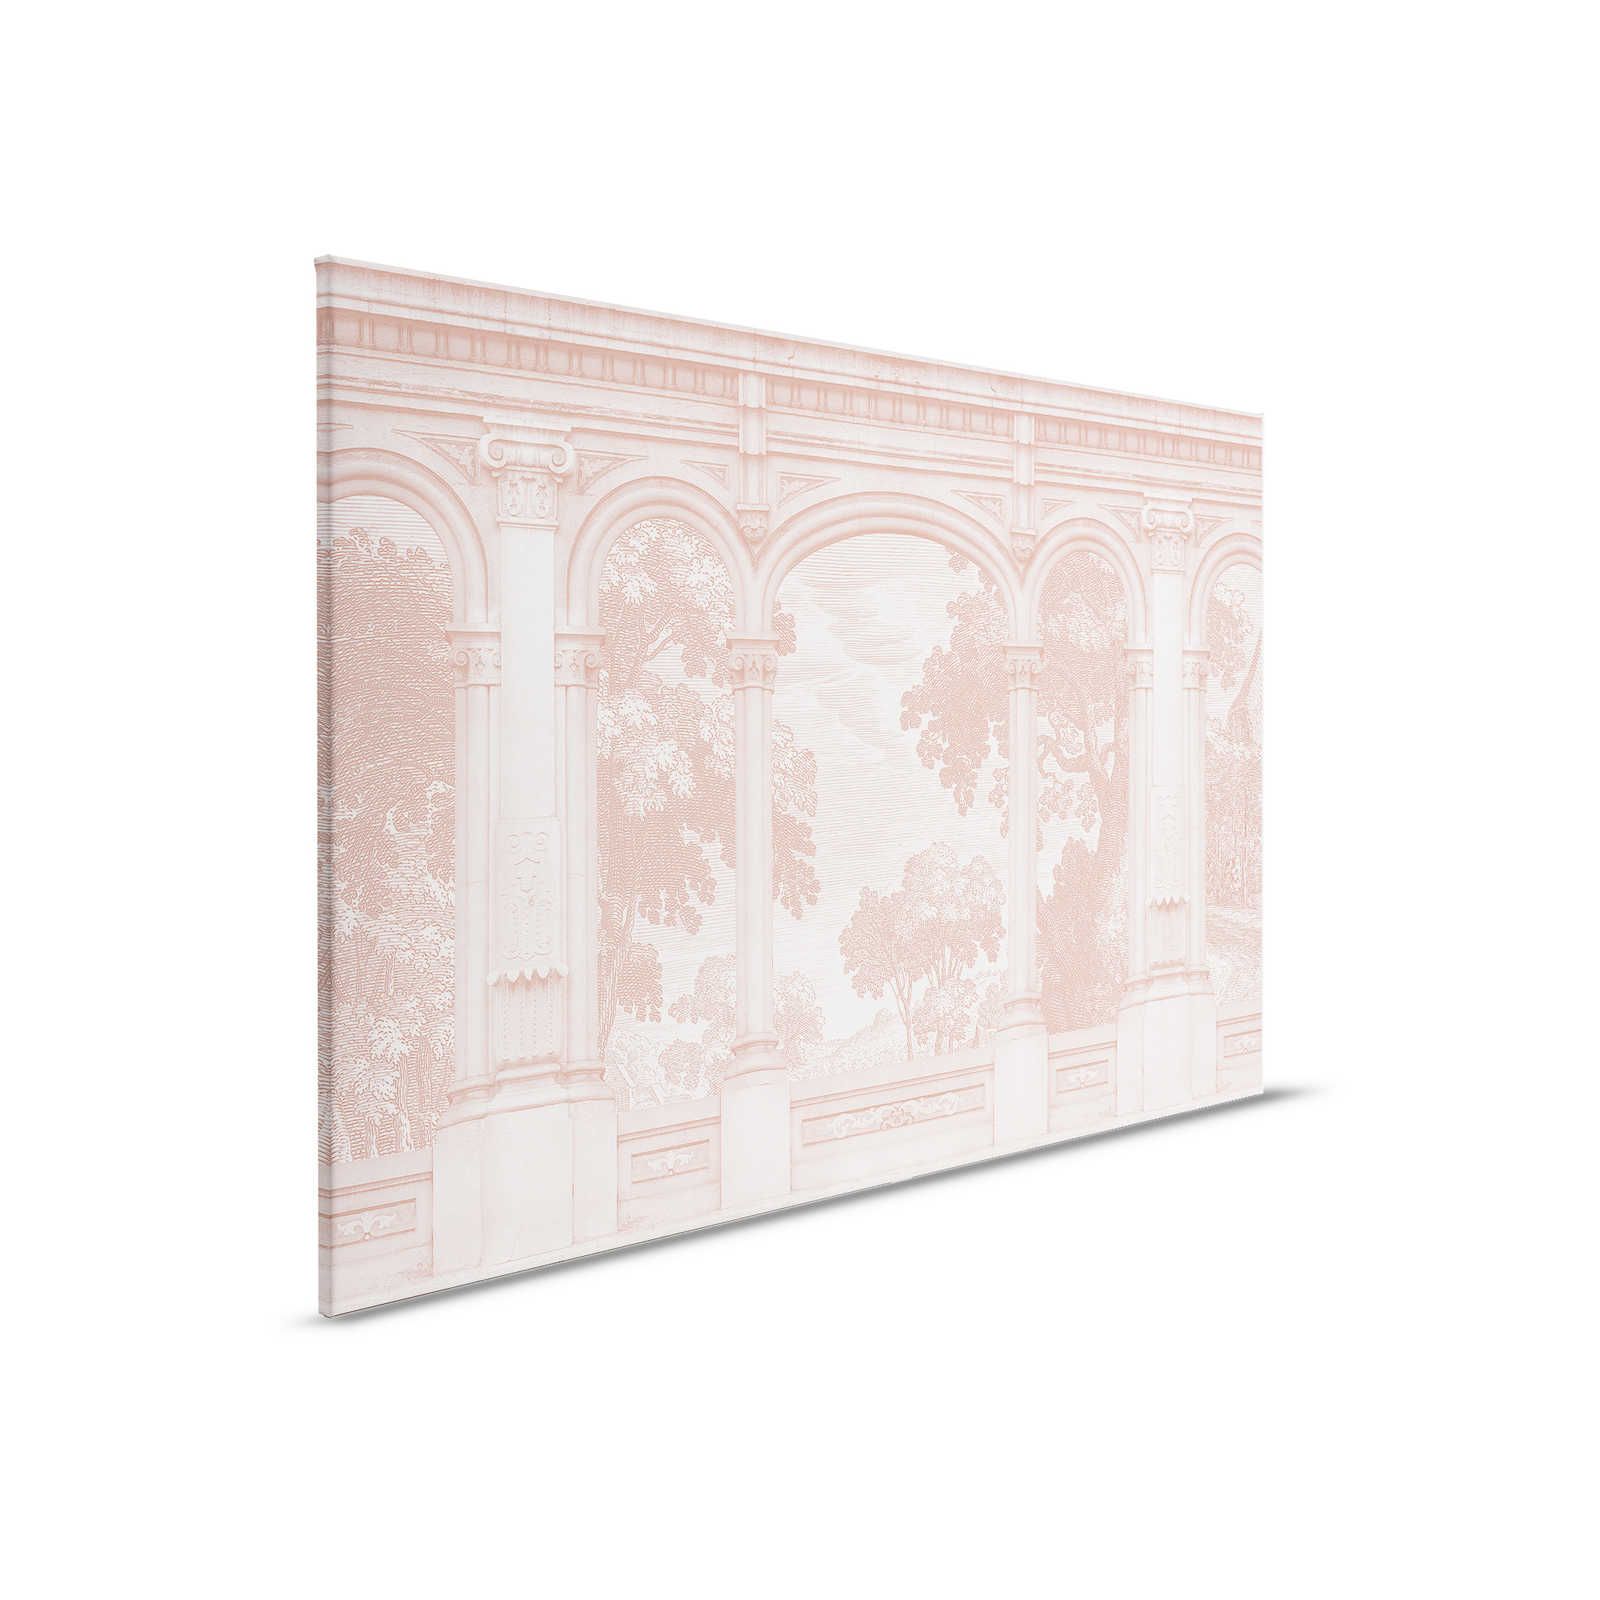         Roma 3 - Pink Canvas Painting Historic Design with Round Arch Window - 0.90 m x 0.60 m
    